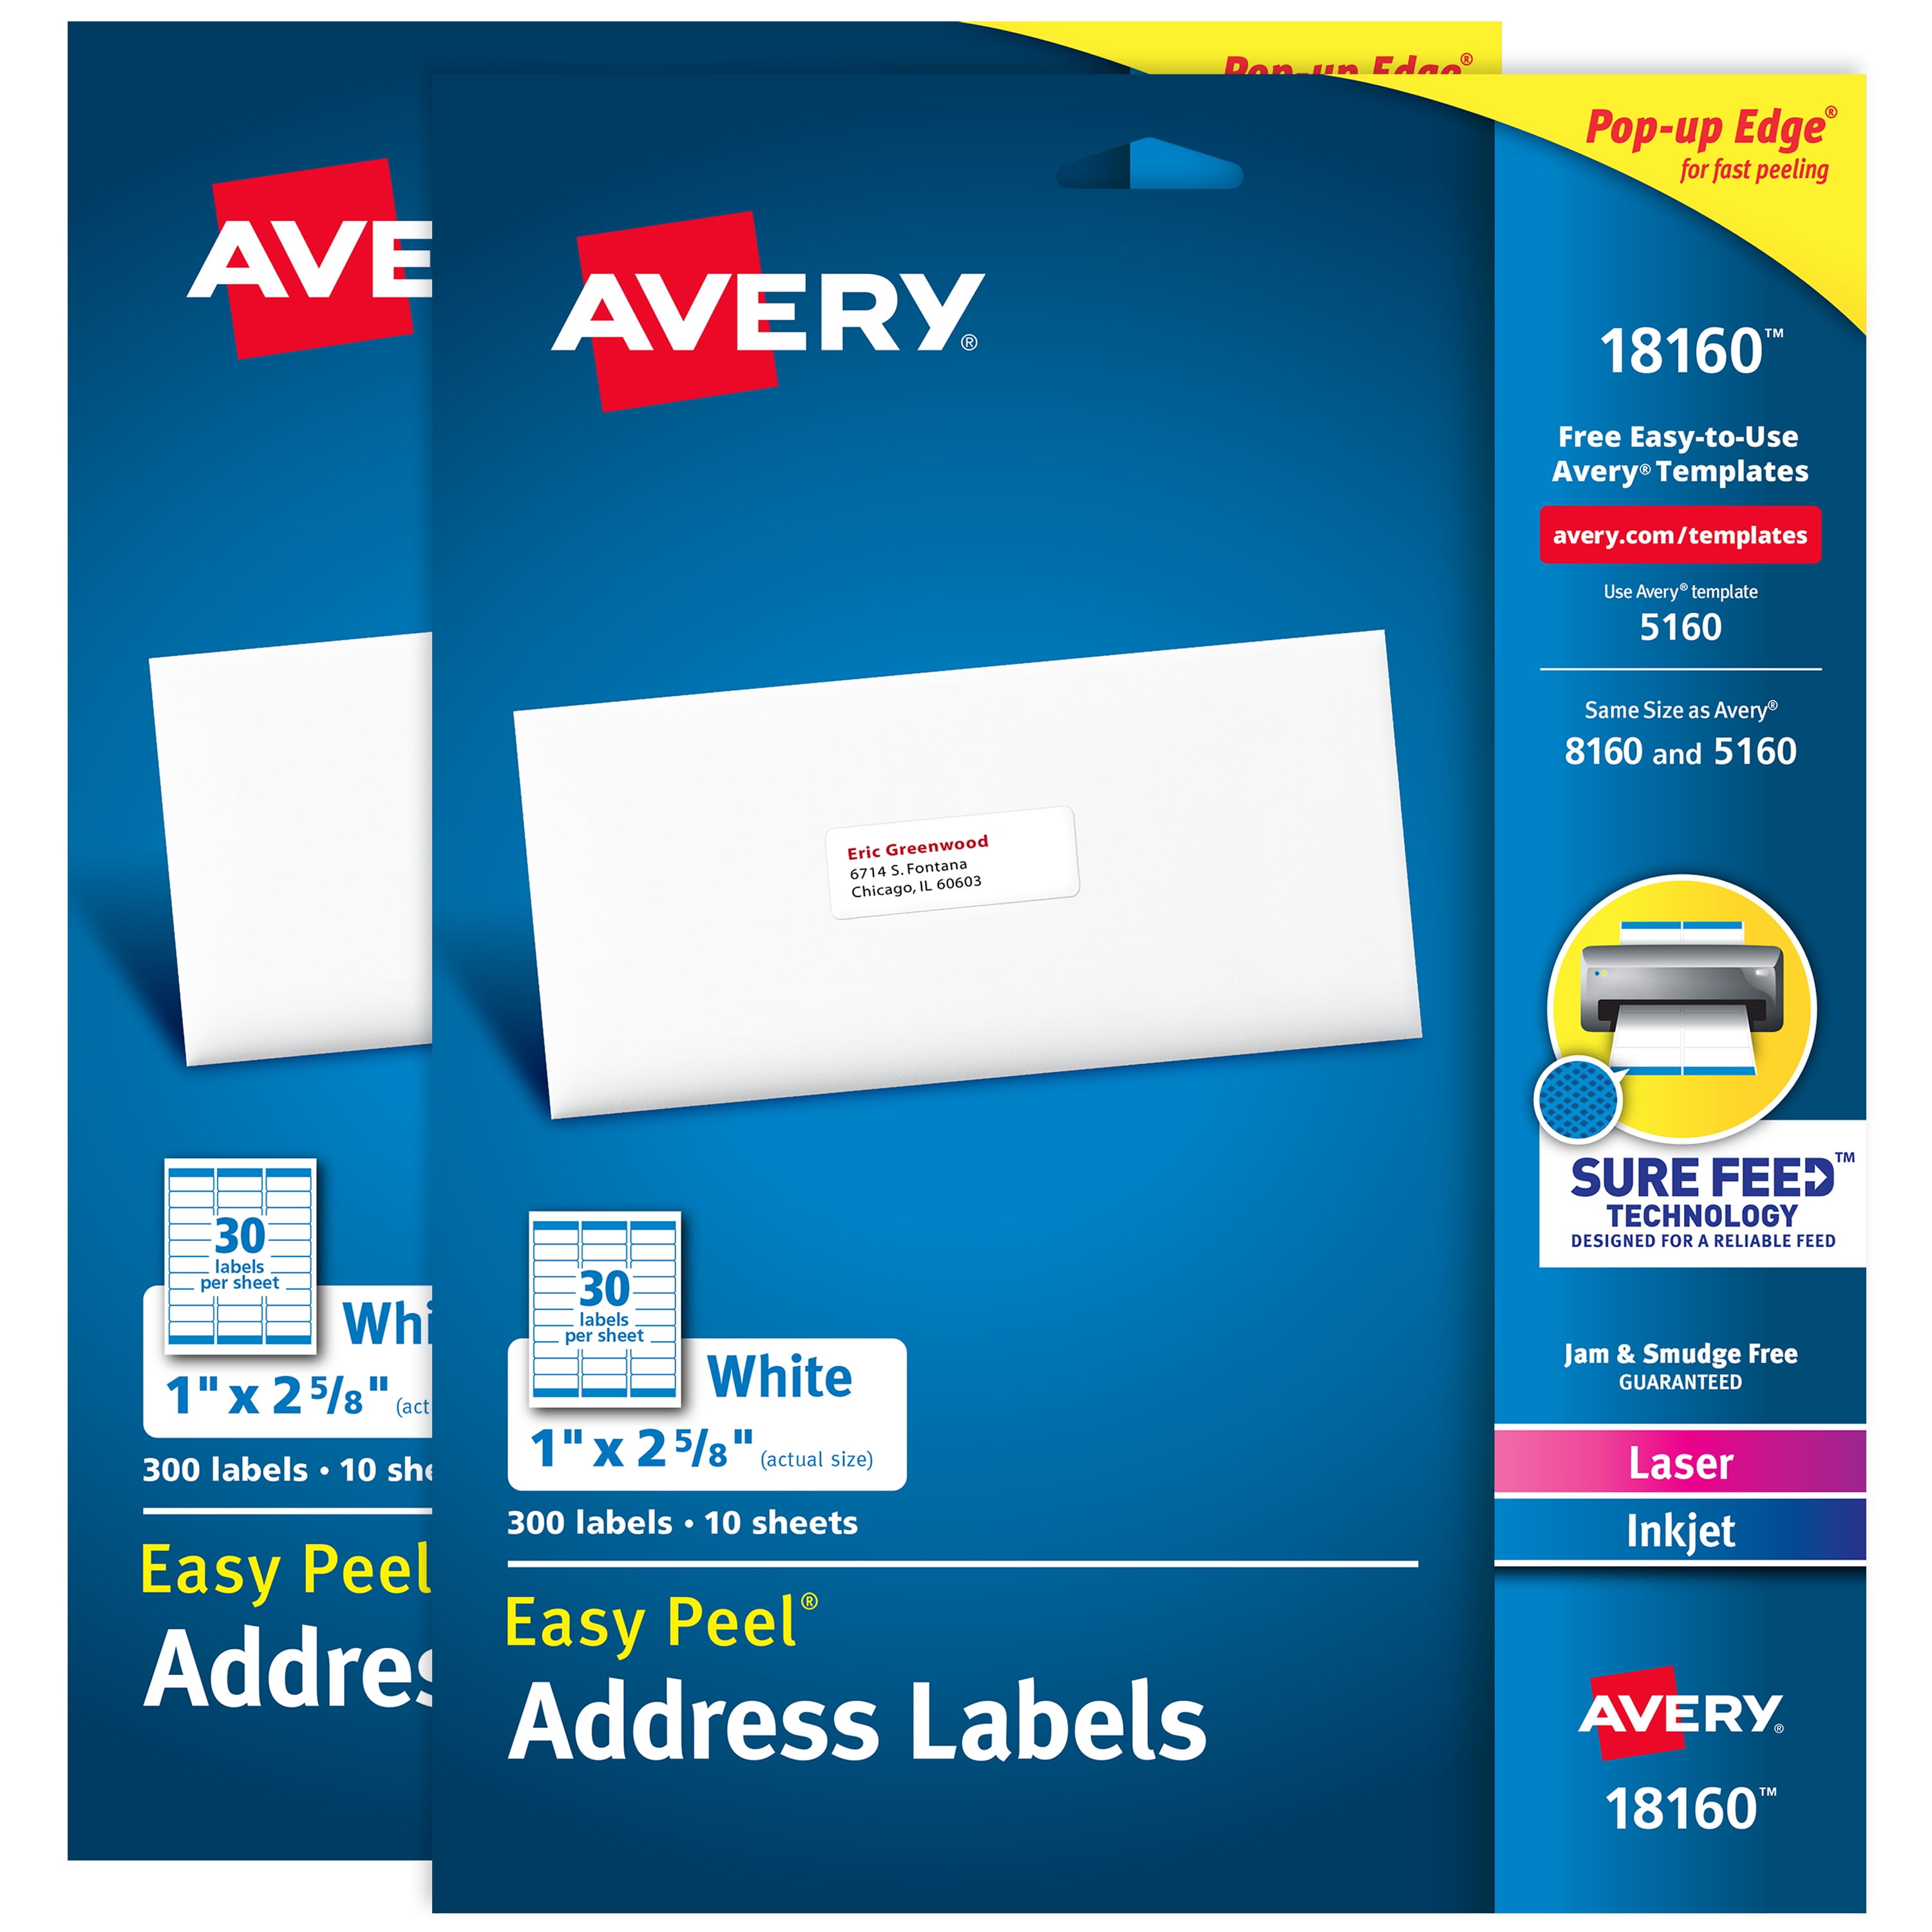  Avery  Easy Peel Address  Labels  1  x  2  5  8  2  Pack of 